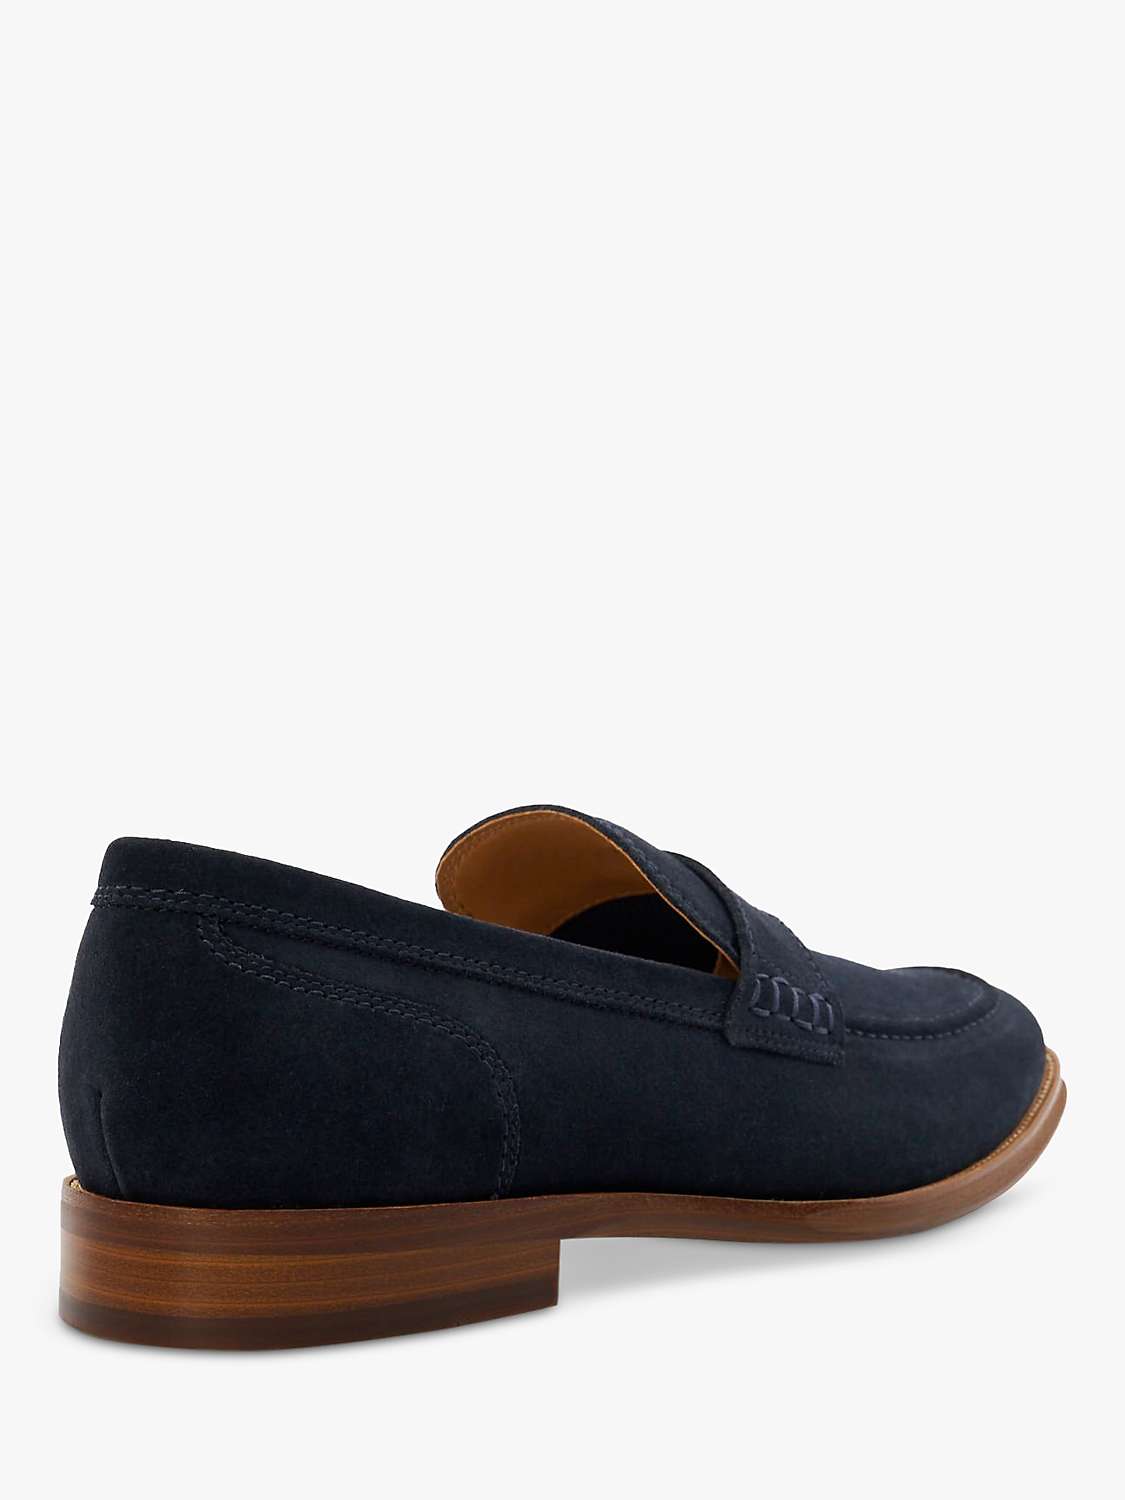 Buy Dune Sulli Natural Sole Penny Loafers, Navy Online at johnlewis.com